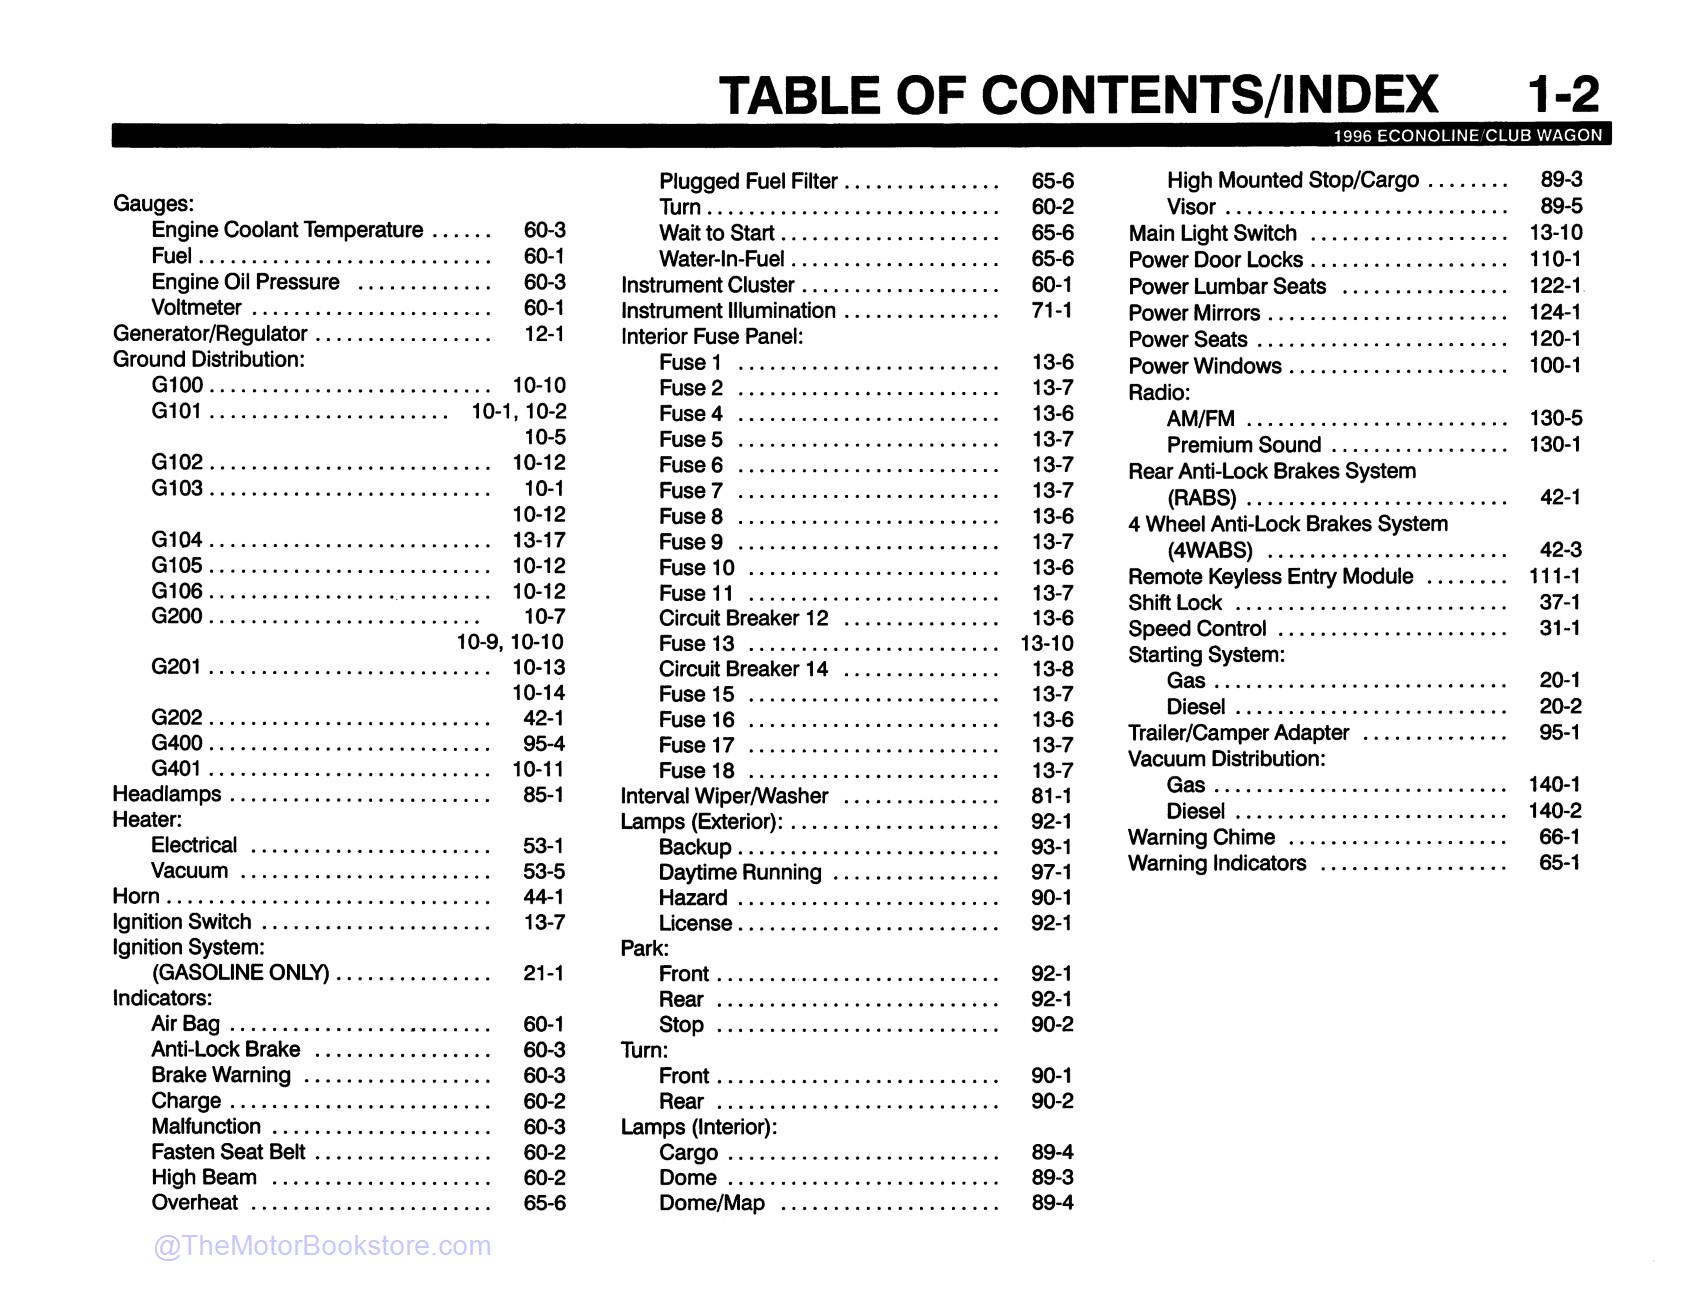 1996 Ford Econoline Electrical and Vacuum Troubleshooting Manual  - Table of Contents 2